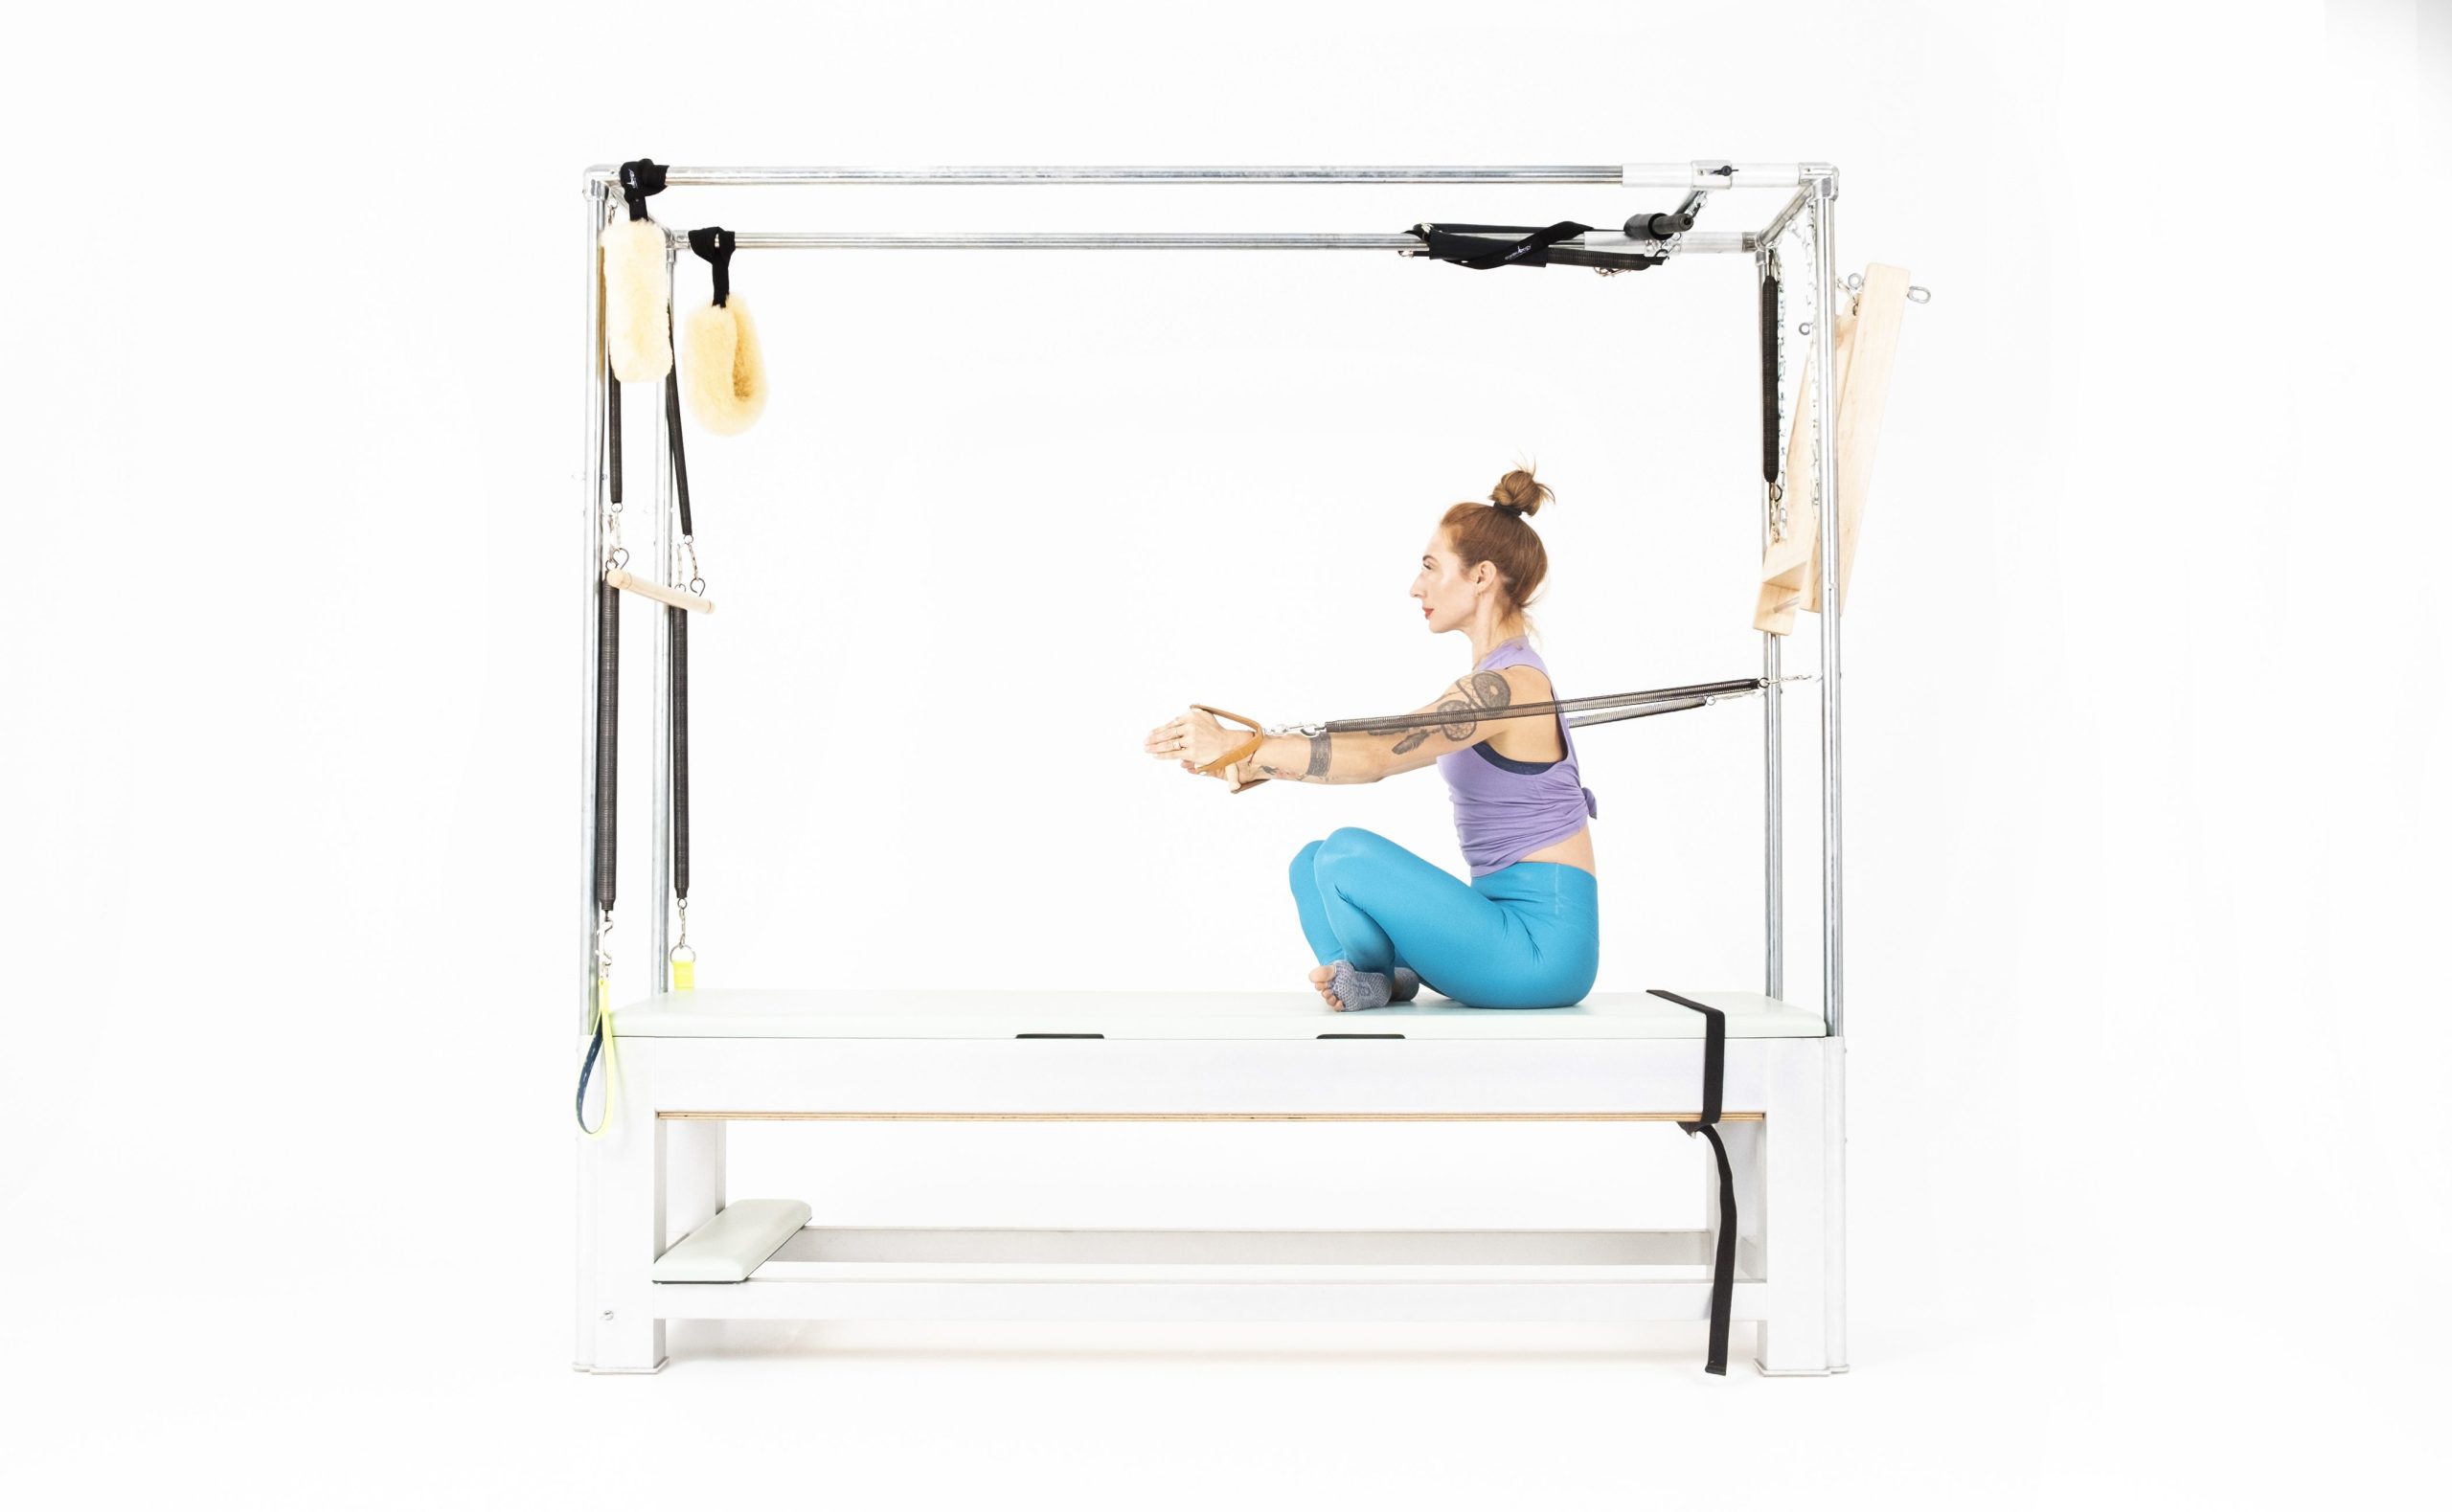 Rowing 6 Hug with Arm Springs on the Cadillac or Tower Online Pilates Classes